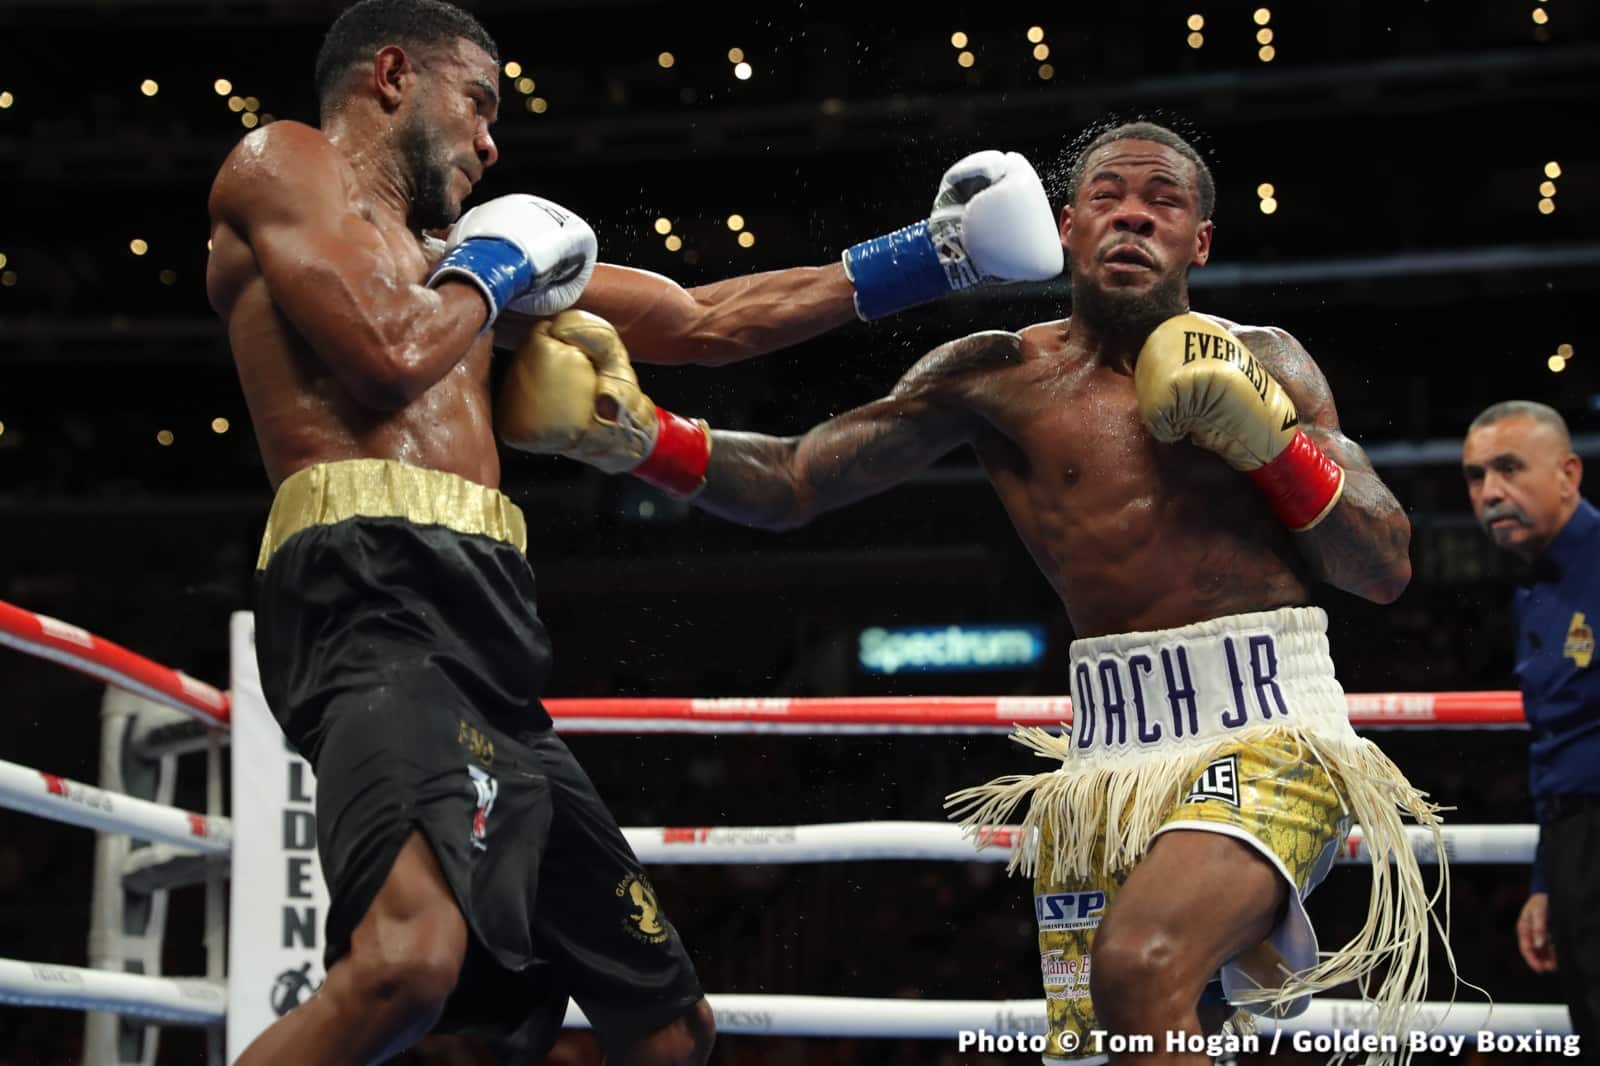 Photos: King Ryan Knocks Out Fortuna In Round 6